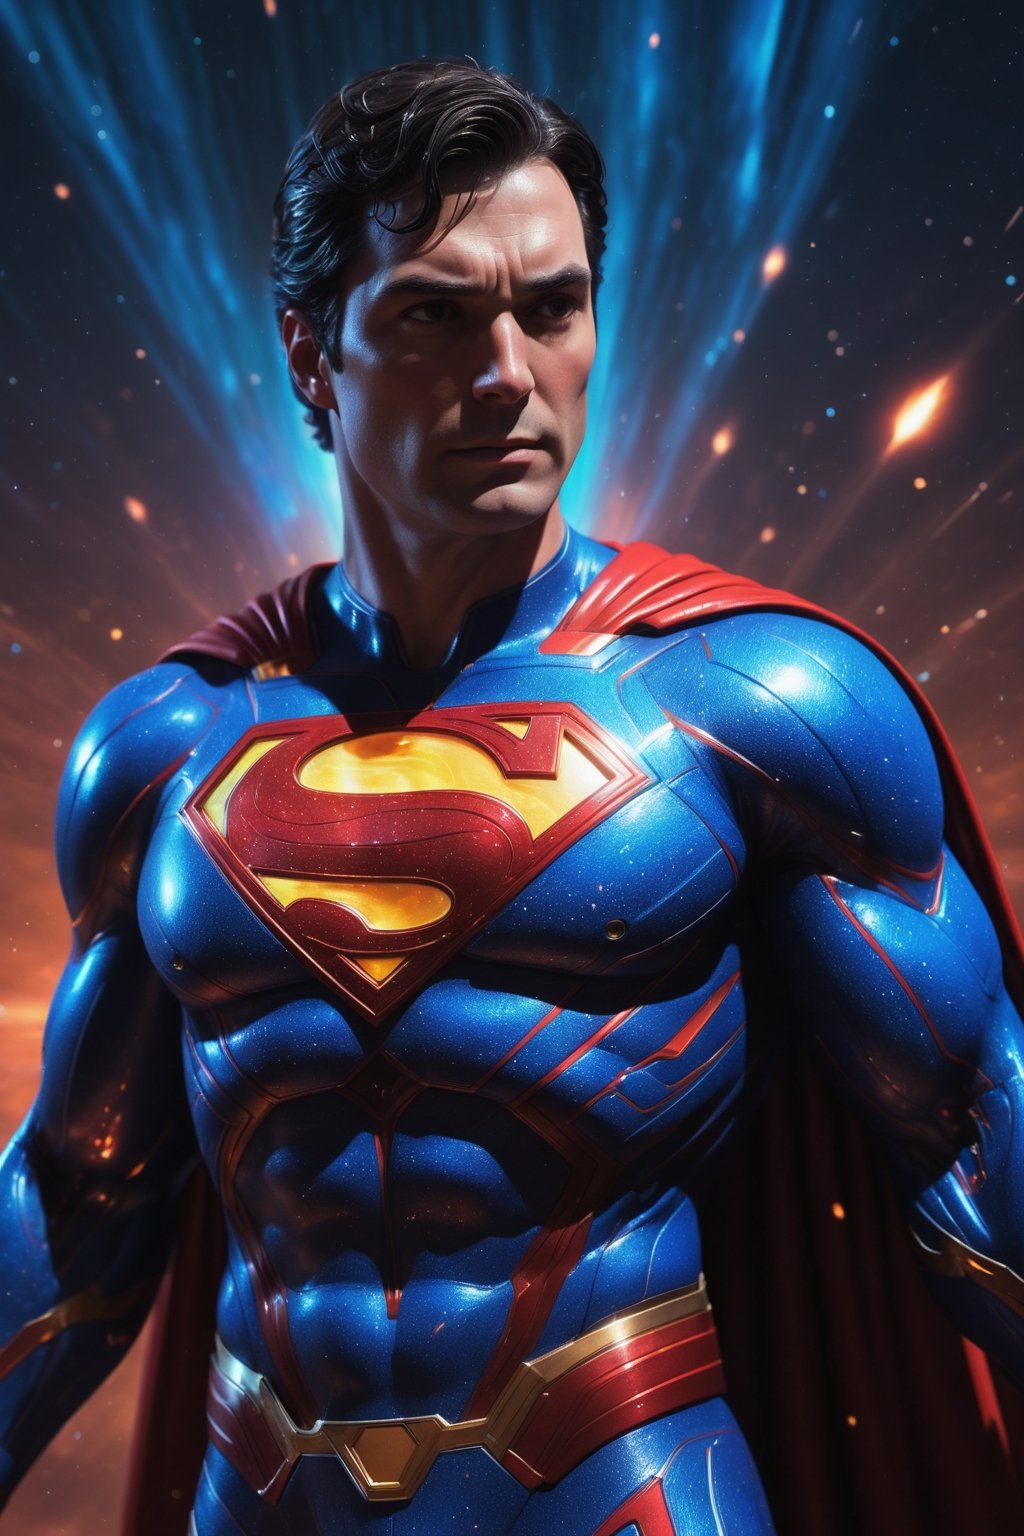 A futuristic Superman suit with a cosmic theme, flying through a meteor shower. The suit is made of a Kryptonian alloy that is incredibly strong and durable. It also has a variety of built-in powers, including heat vision, super strength, and flight. The background is a field of asteroids, with a red giant star in the distance. The special effects include glowing energy lines around the suit, and a cosmic energy field surrounding Superman. Rendered in stunning photorealism, with incredible detail and质感.